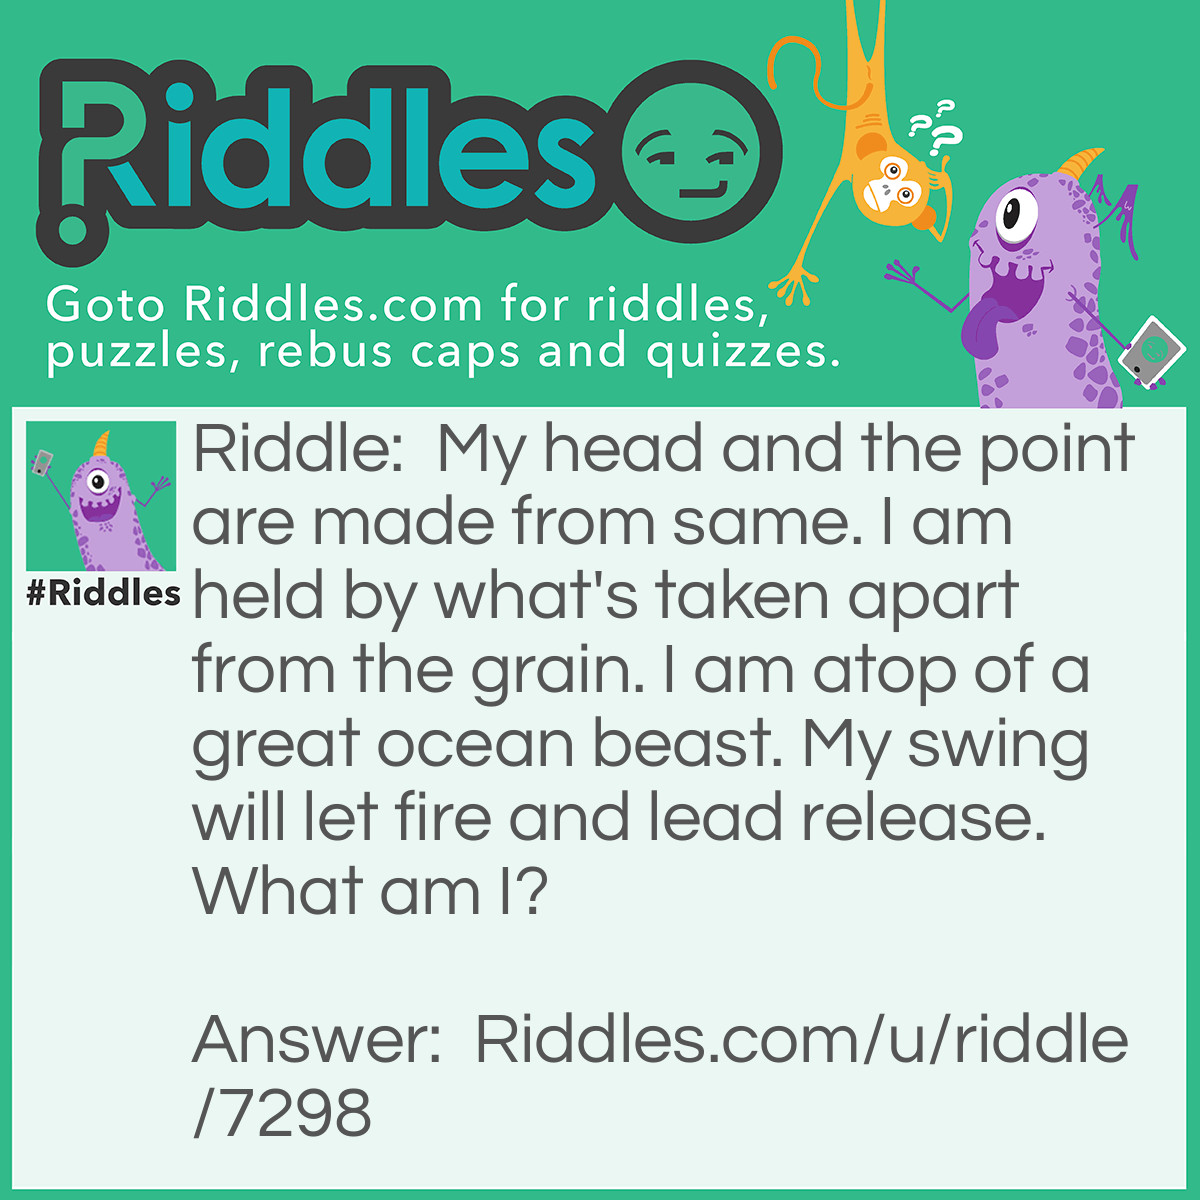 Riddle: My head and the point are made from same. I am held by what's taken apart from the grain. I am atop of a great ocean beast. My swing will let fire and lead release. What am I? Answer: Hammer.